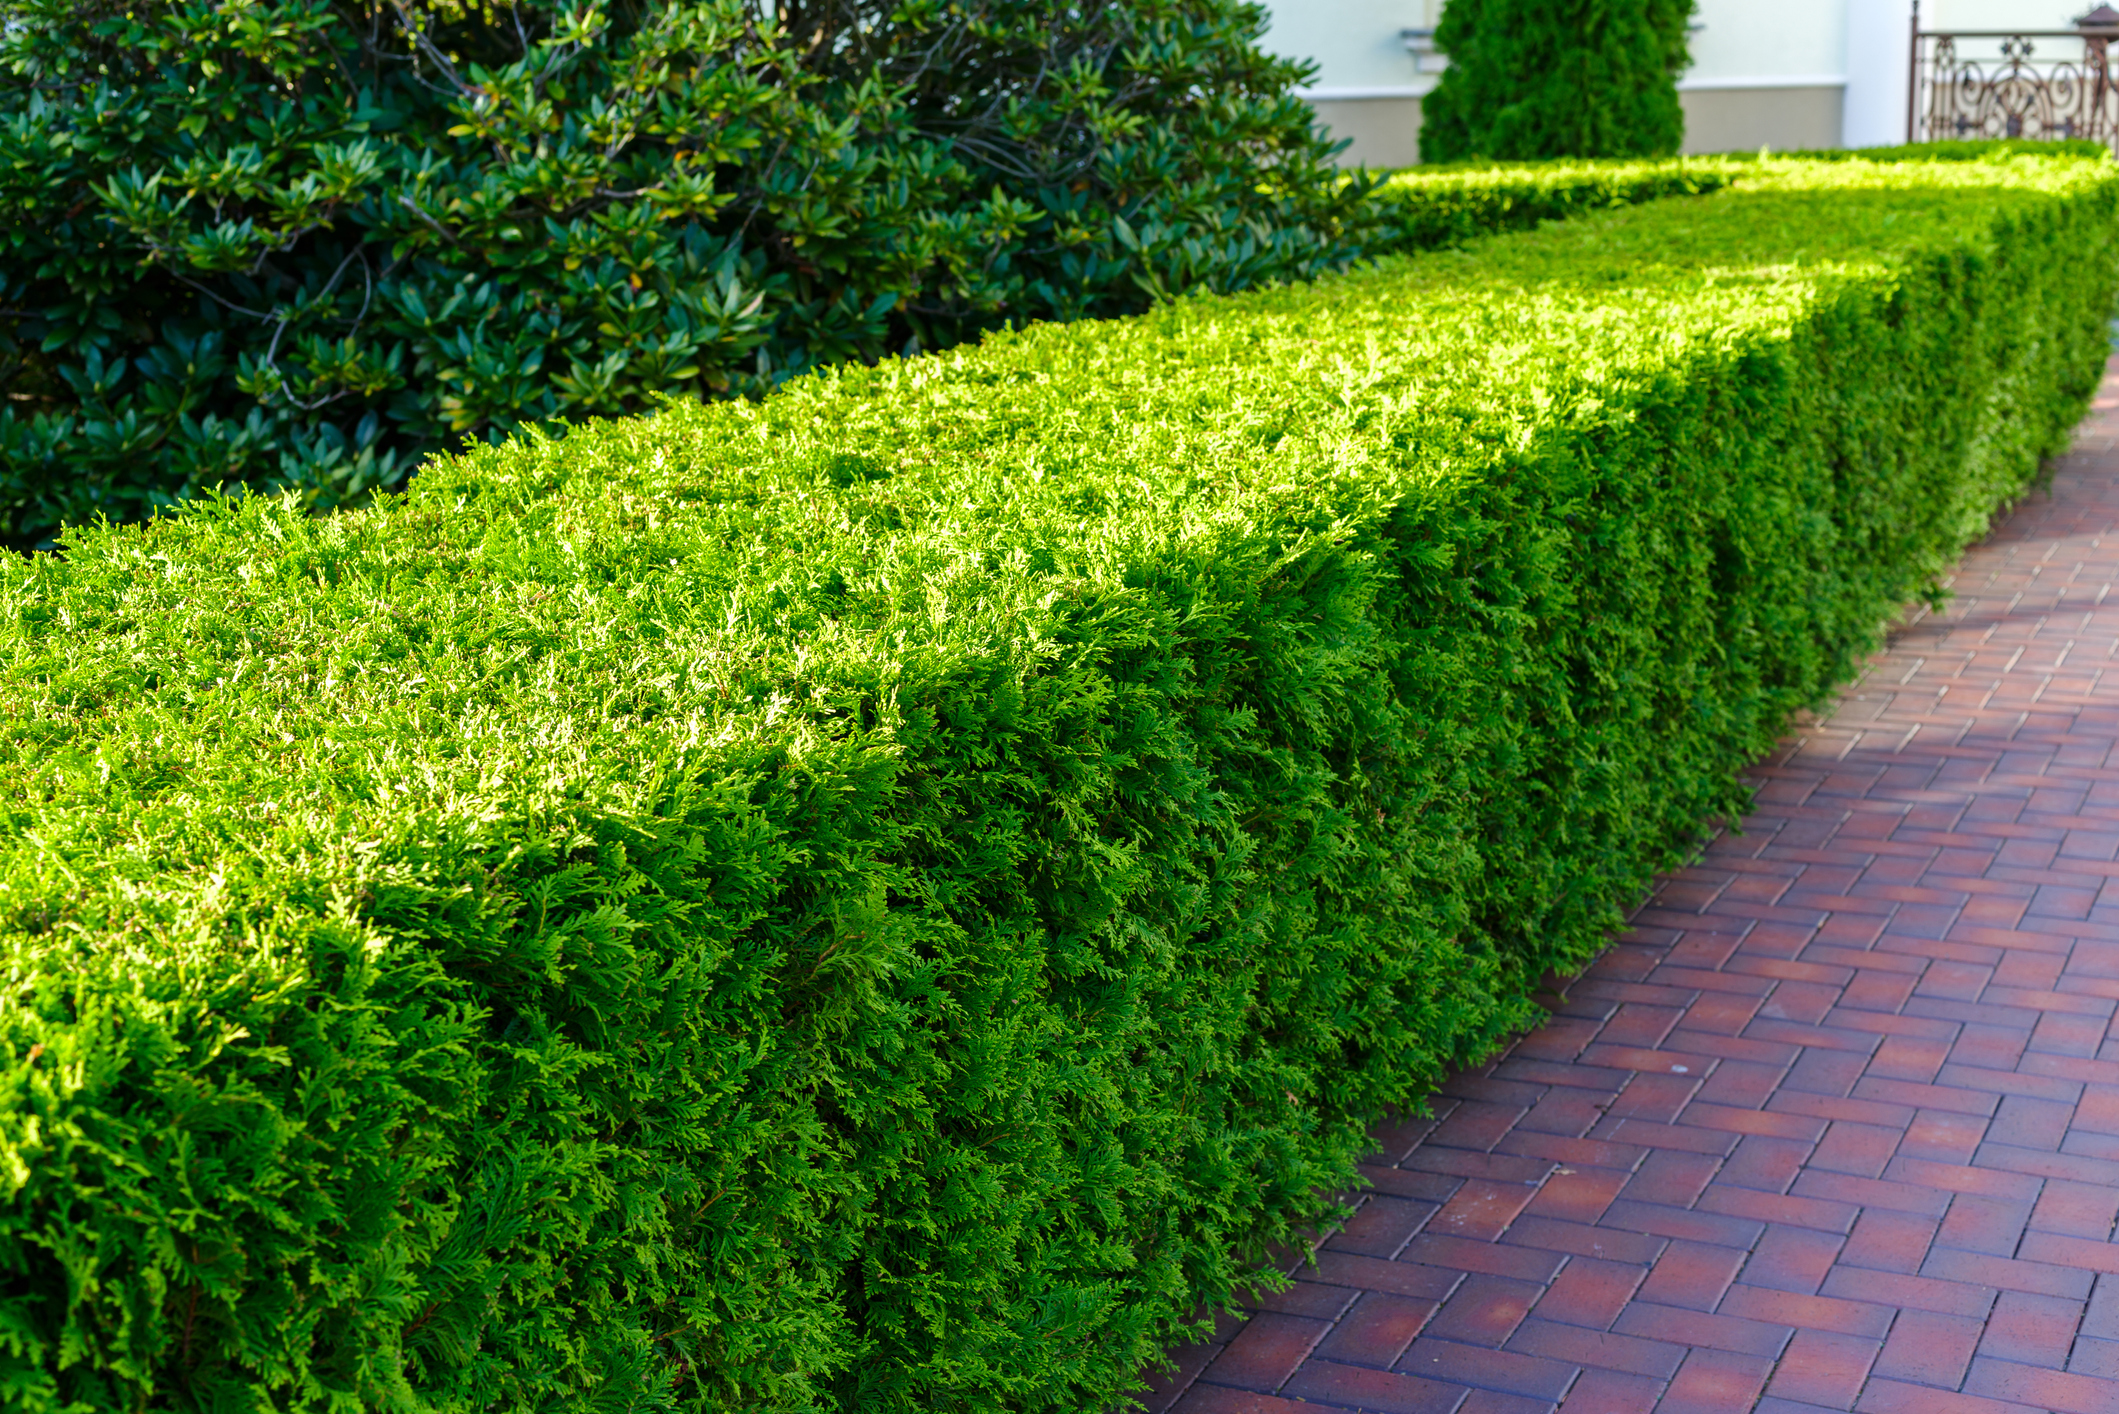 Ehile boxwoods aren't a north american native plant they are a popular option for many.